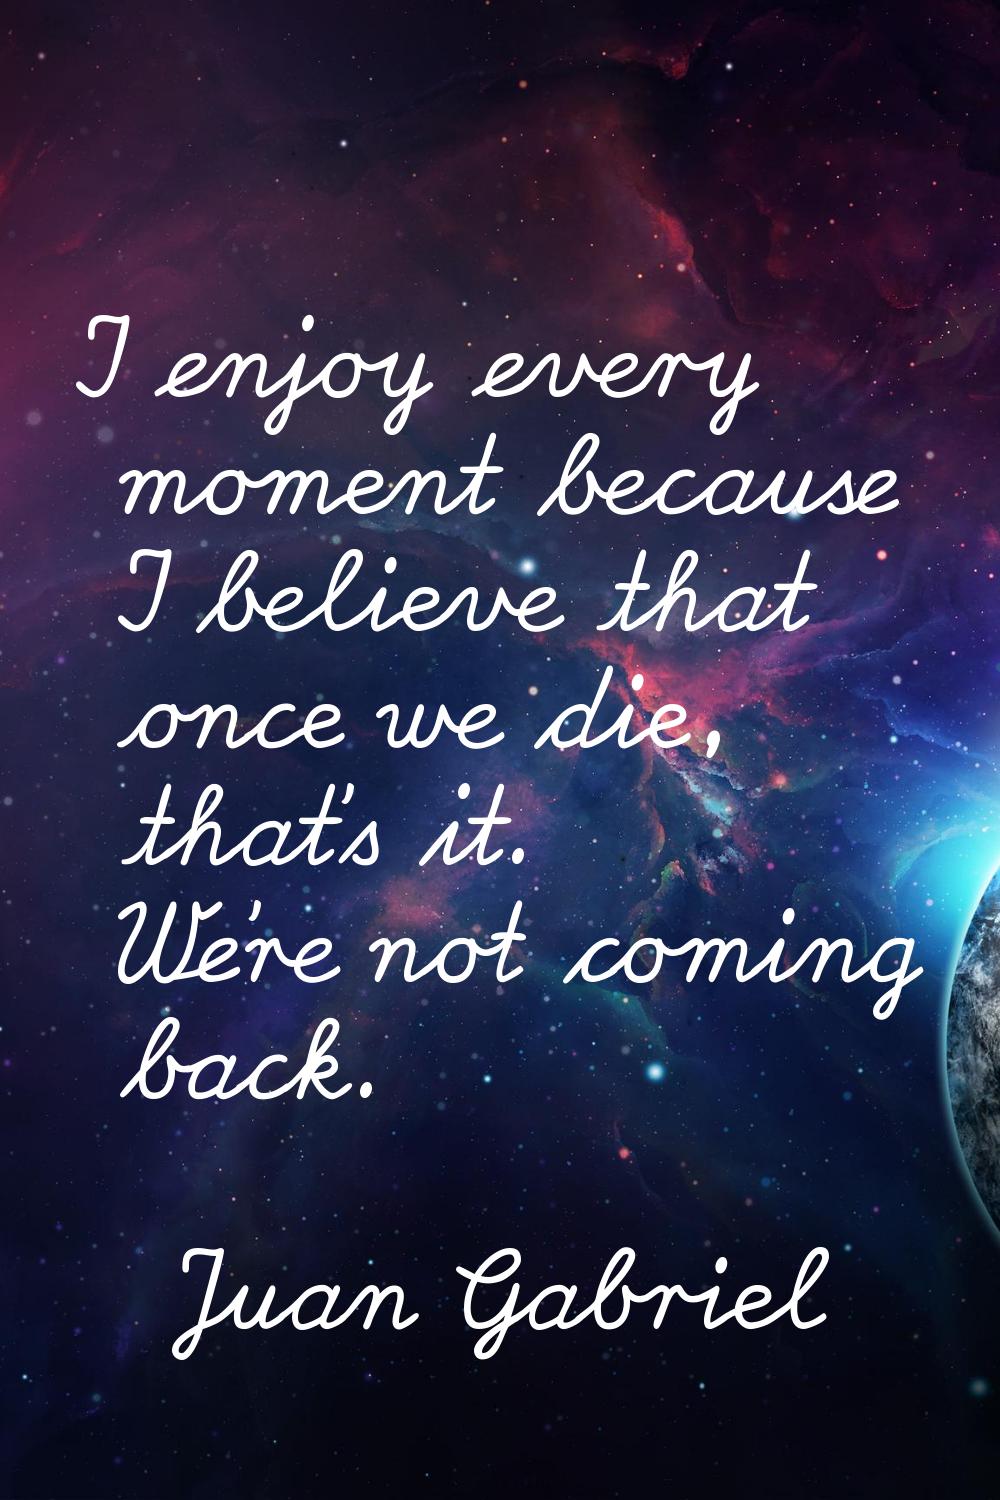 I enjoy every moment because I believe that once we die, that's it. We're not coming back.